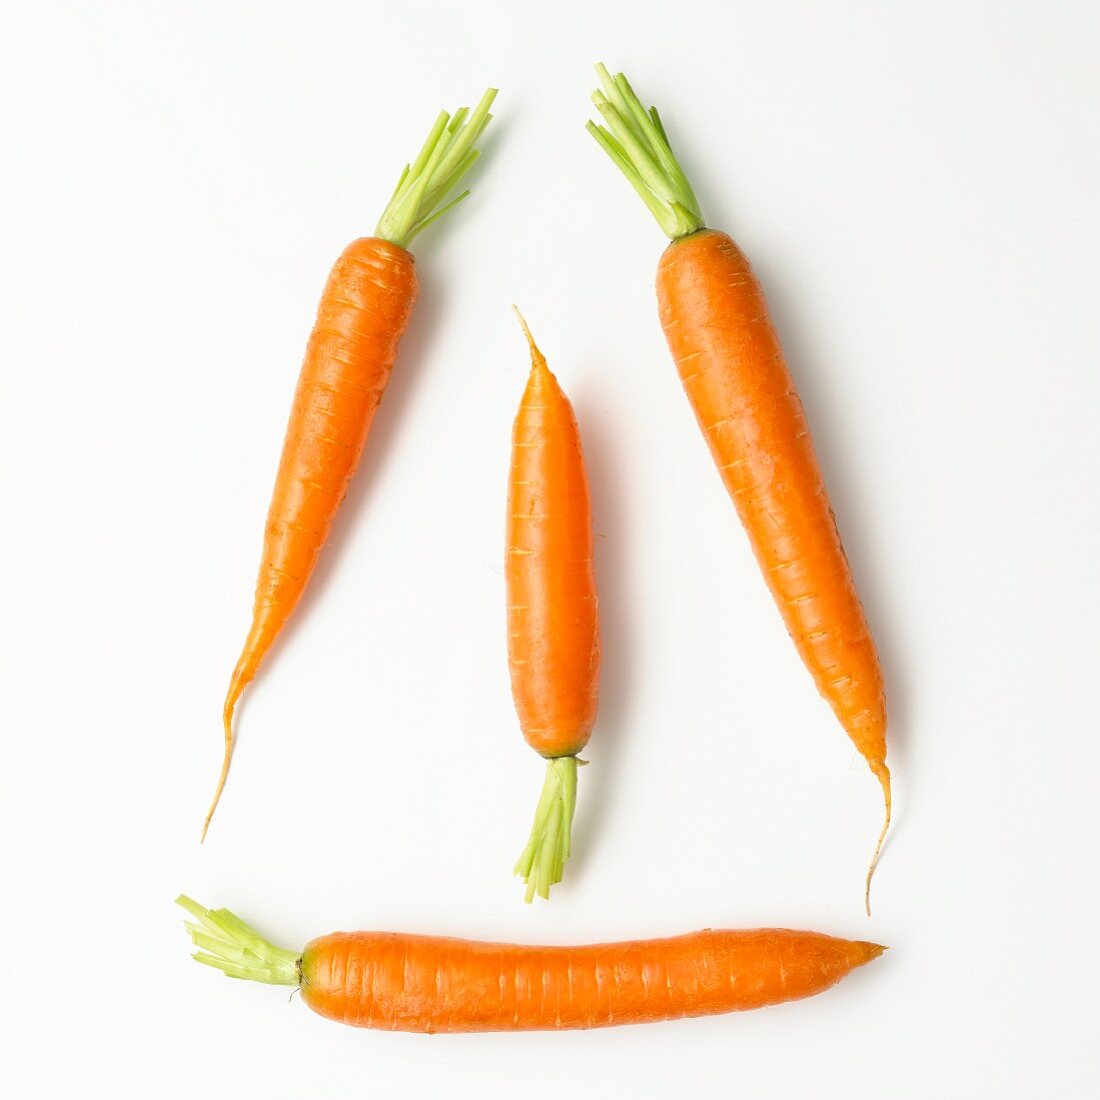 Four carrots on a white surface